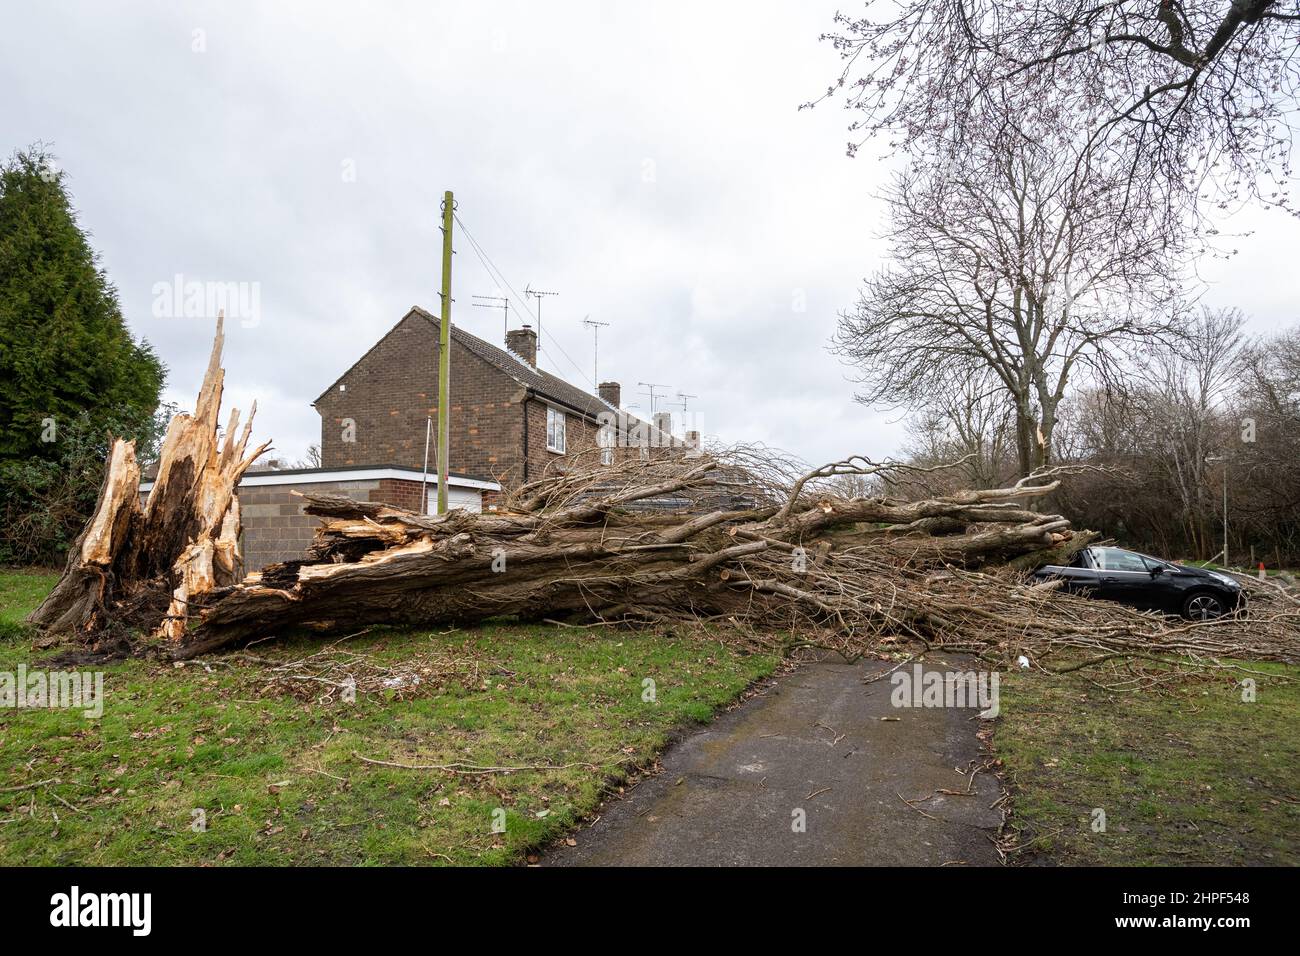 February 2022, Storm Eunice Damage. A car parked outside houses was crushed by a large fallen tree during storm Eunice in Marrowbrook Lane, Farnborough, Hampshire, England, UK. The highest wind speed ever seen in England of 122 mph was recorded during the storm which occurred on February 18th, 2022, one of three named storms in 5 days. Extreme weather is linked to the climate change crisis. Stock Photo